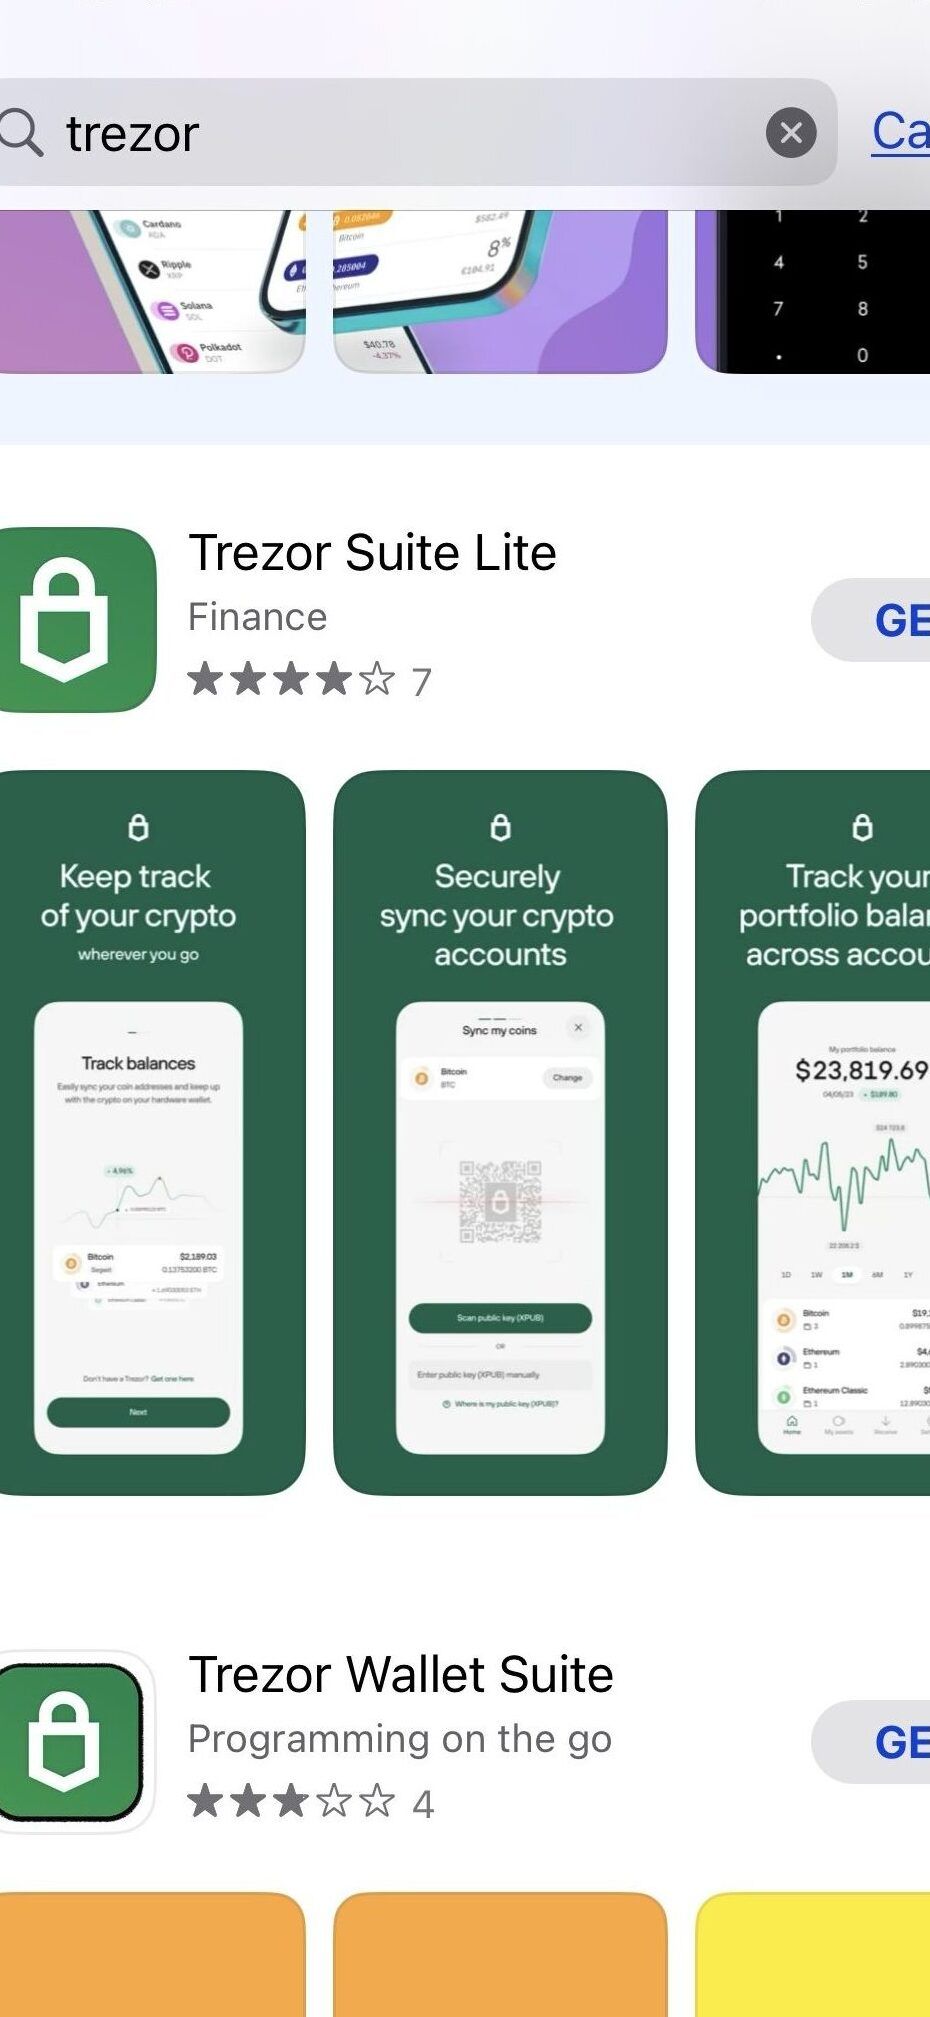 Fake app is second on UK App Store with the authentic Trezor Suite Lite above it